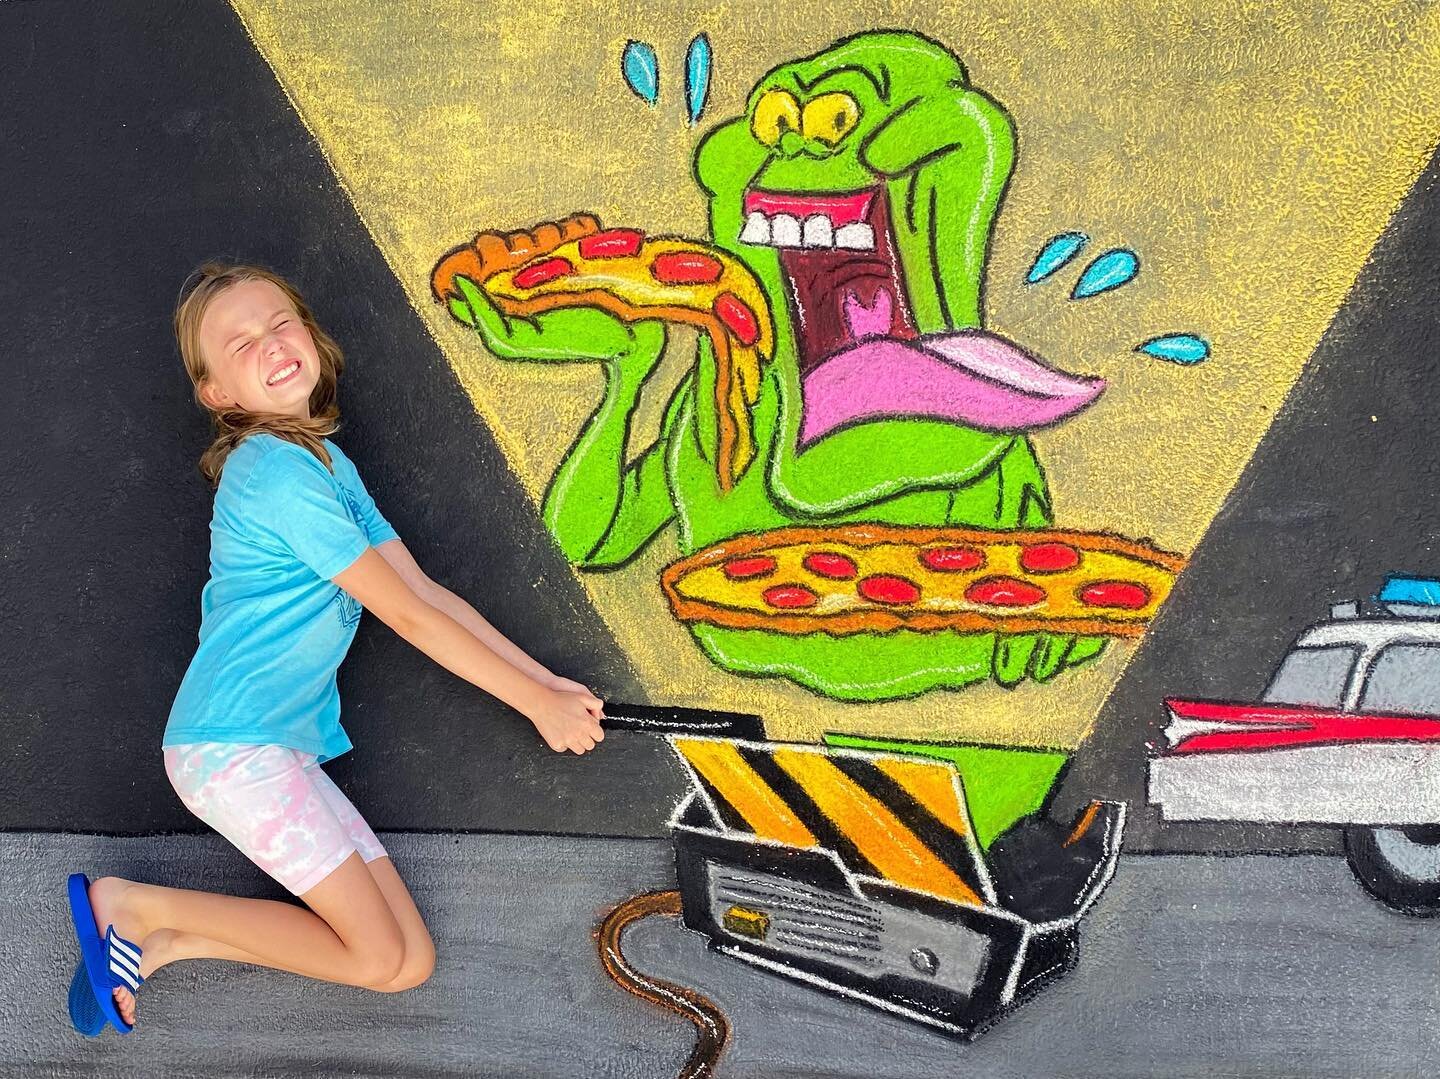 When you&rsquo;re not QUITE ready for Fall or all the things that come with it. 👻 (I&rsquo;ll take the pizza though.)
.
.
.
#chalkyourwalk #chalkart #sidewalkchalk #chalkedintoit #ghostbusters #slimer #littlemissmurals @ghostbusters